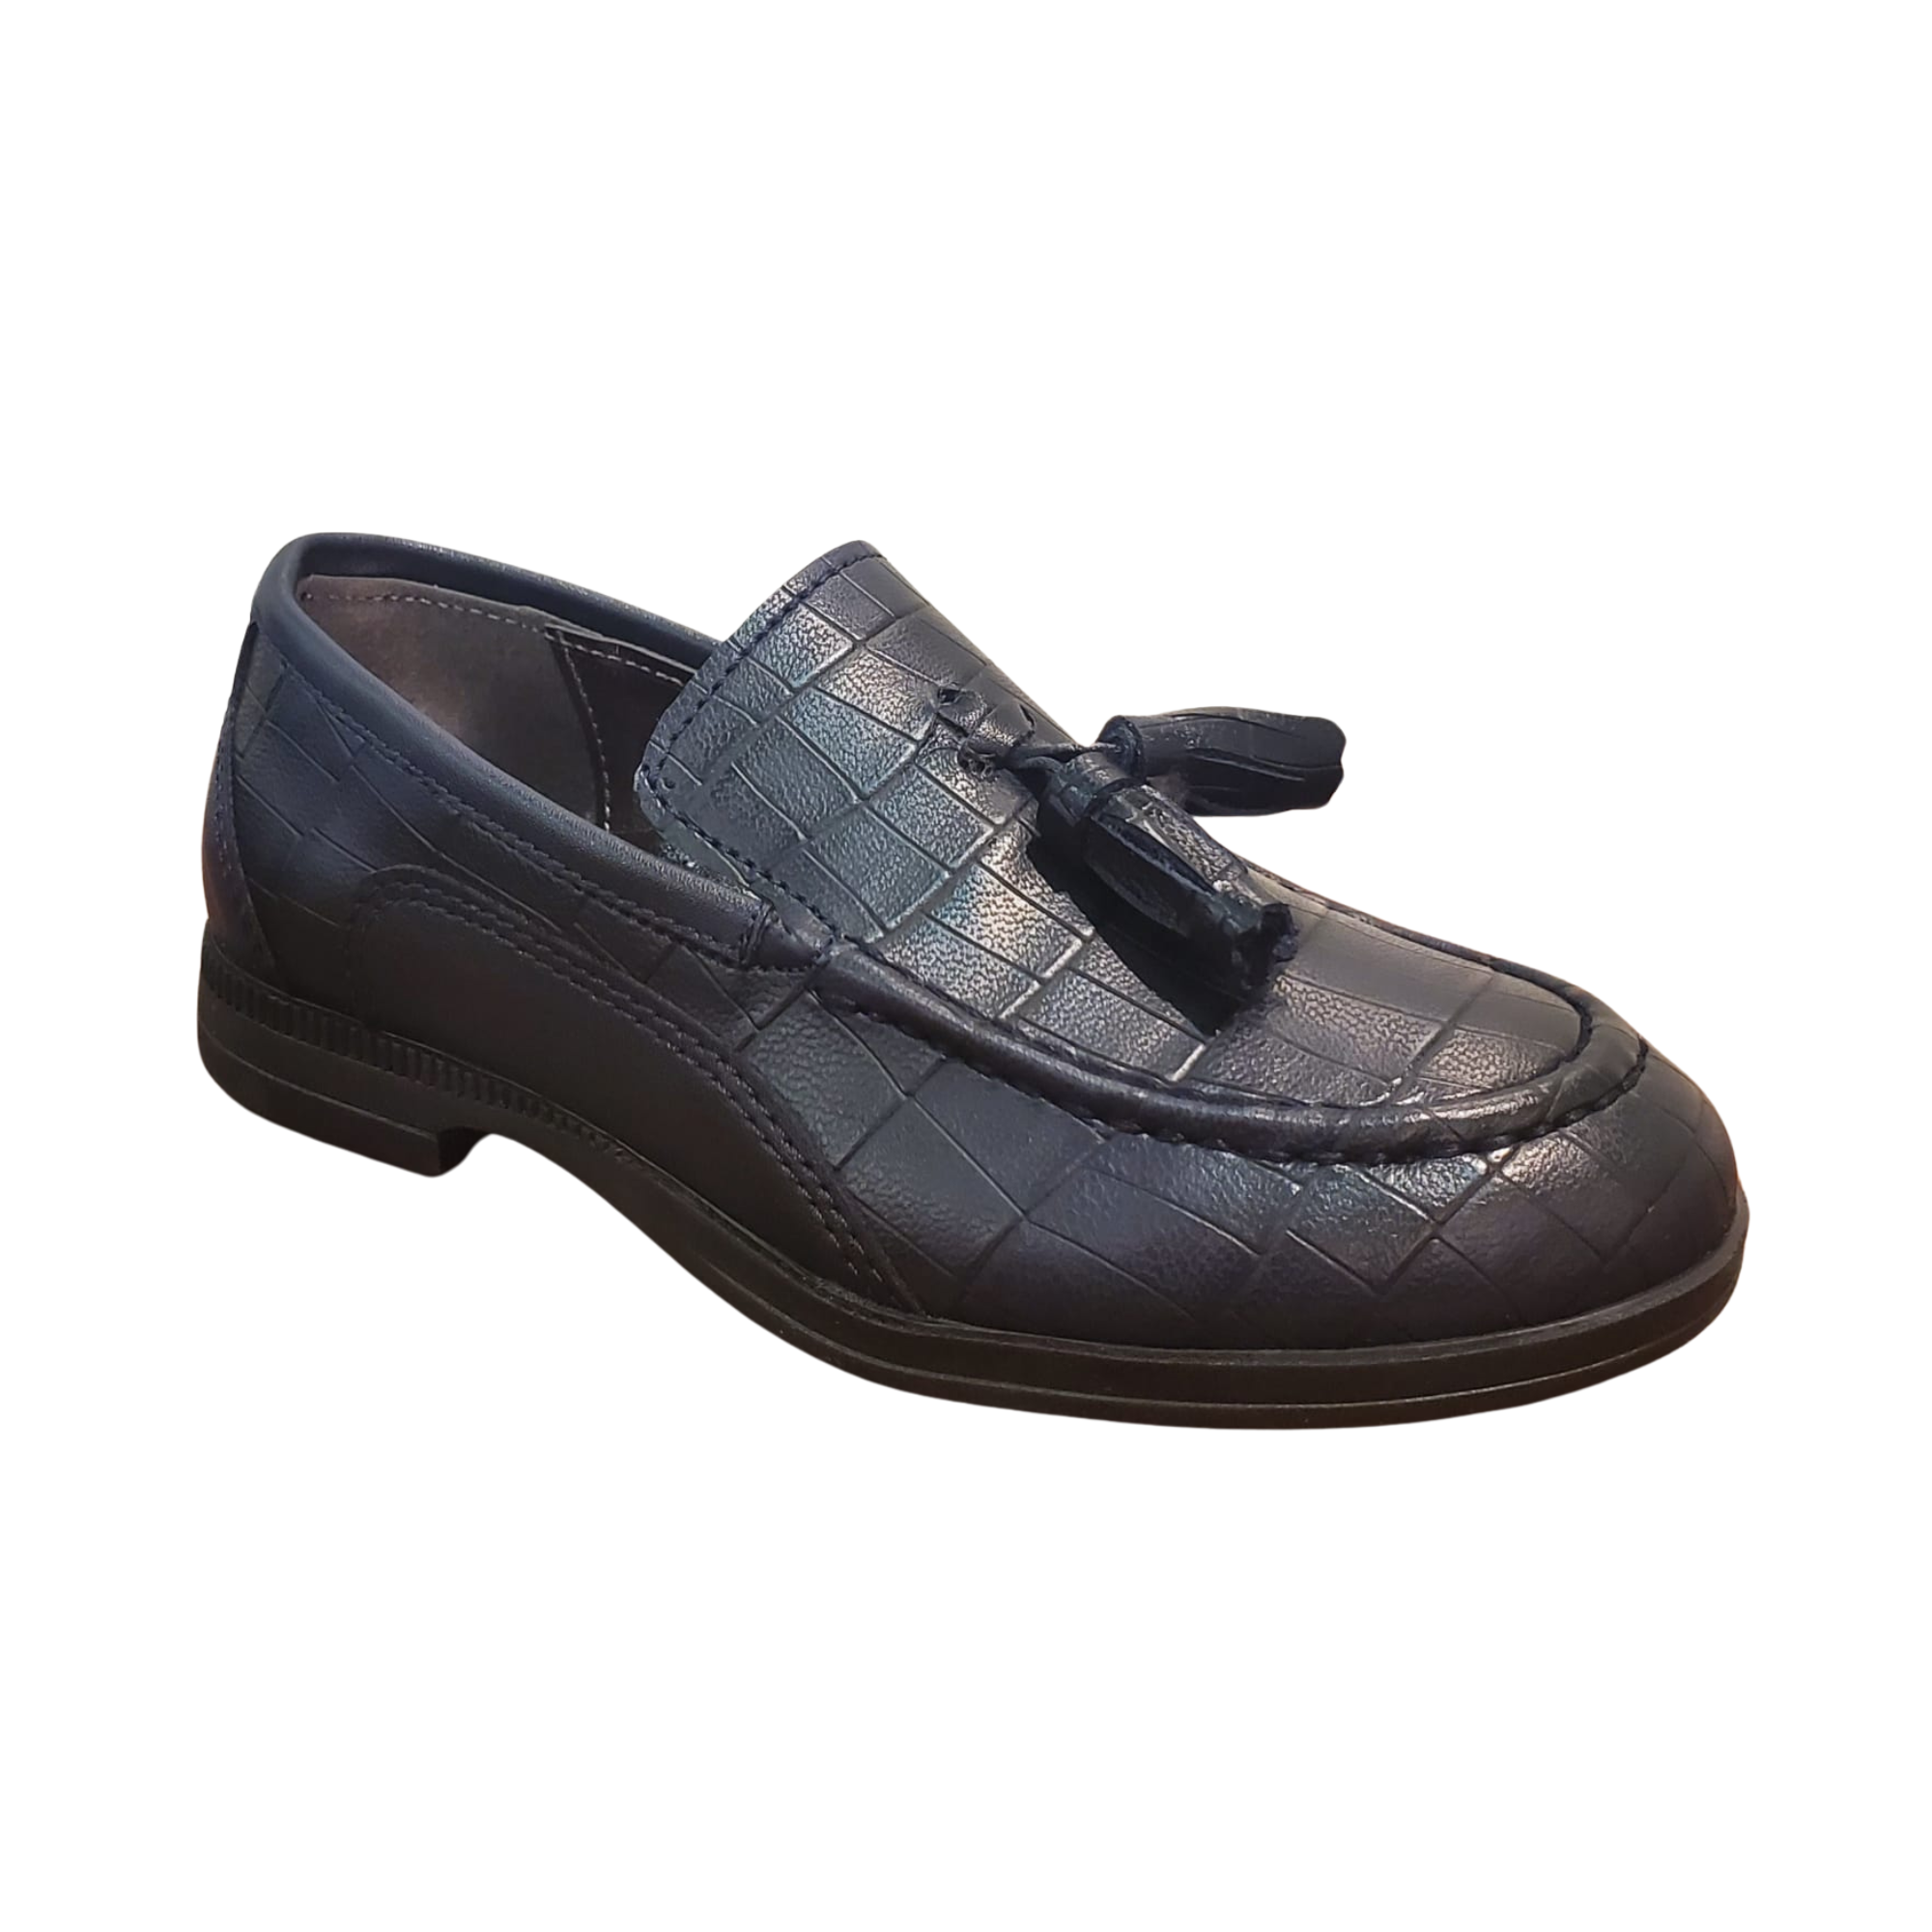 Leather Croco Loafer